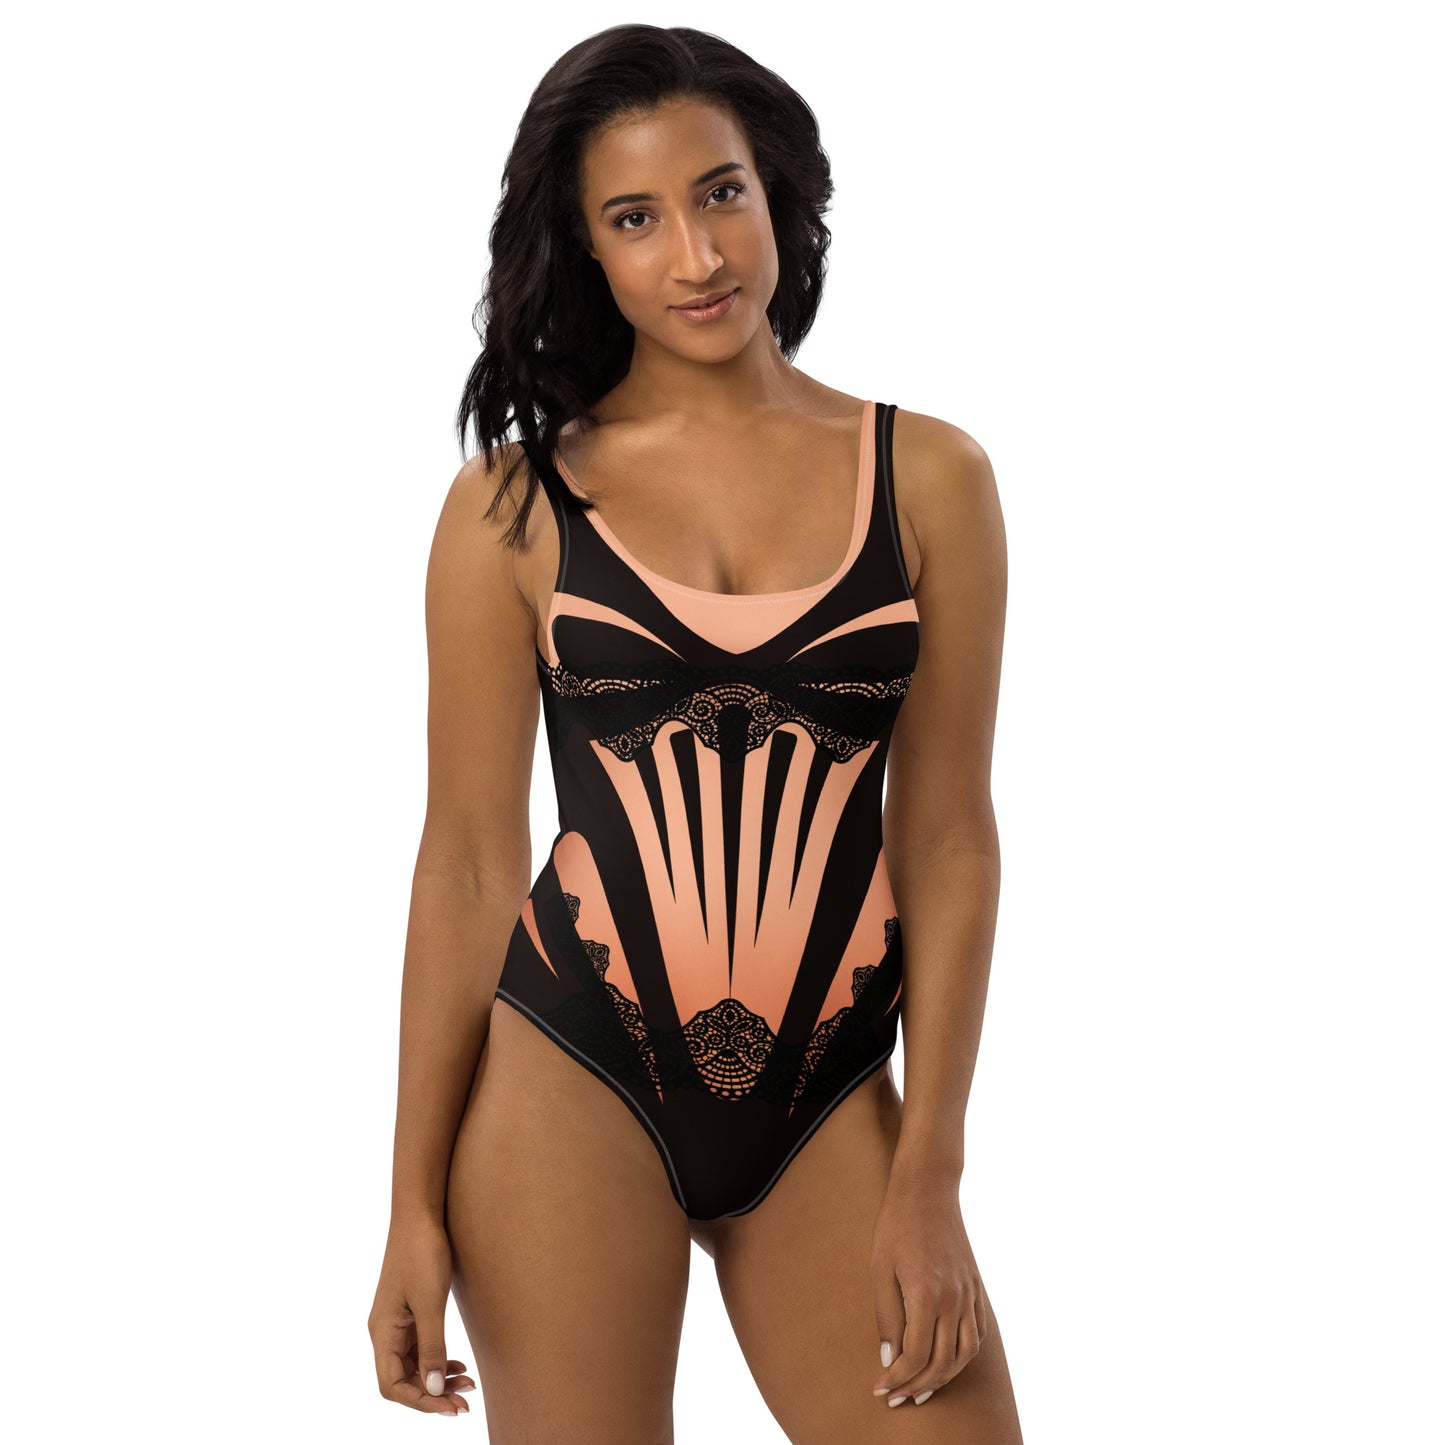 AFA The Eye Of the Tiger Lace One-Piece Swimsuit